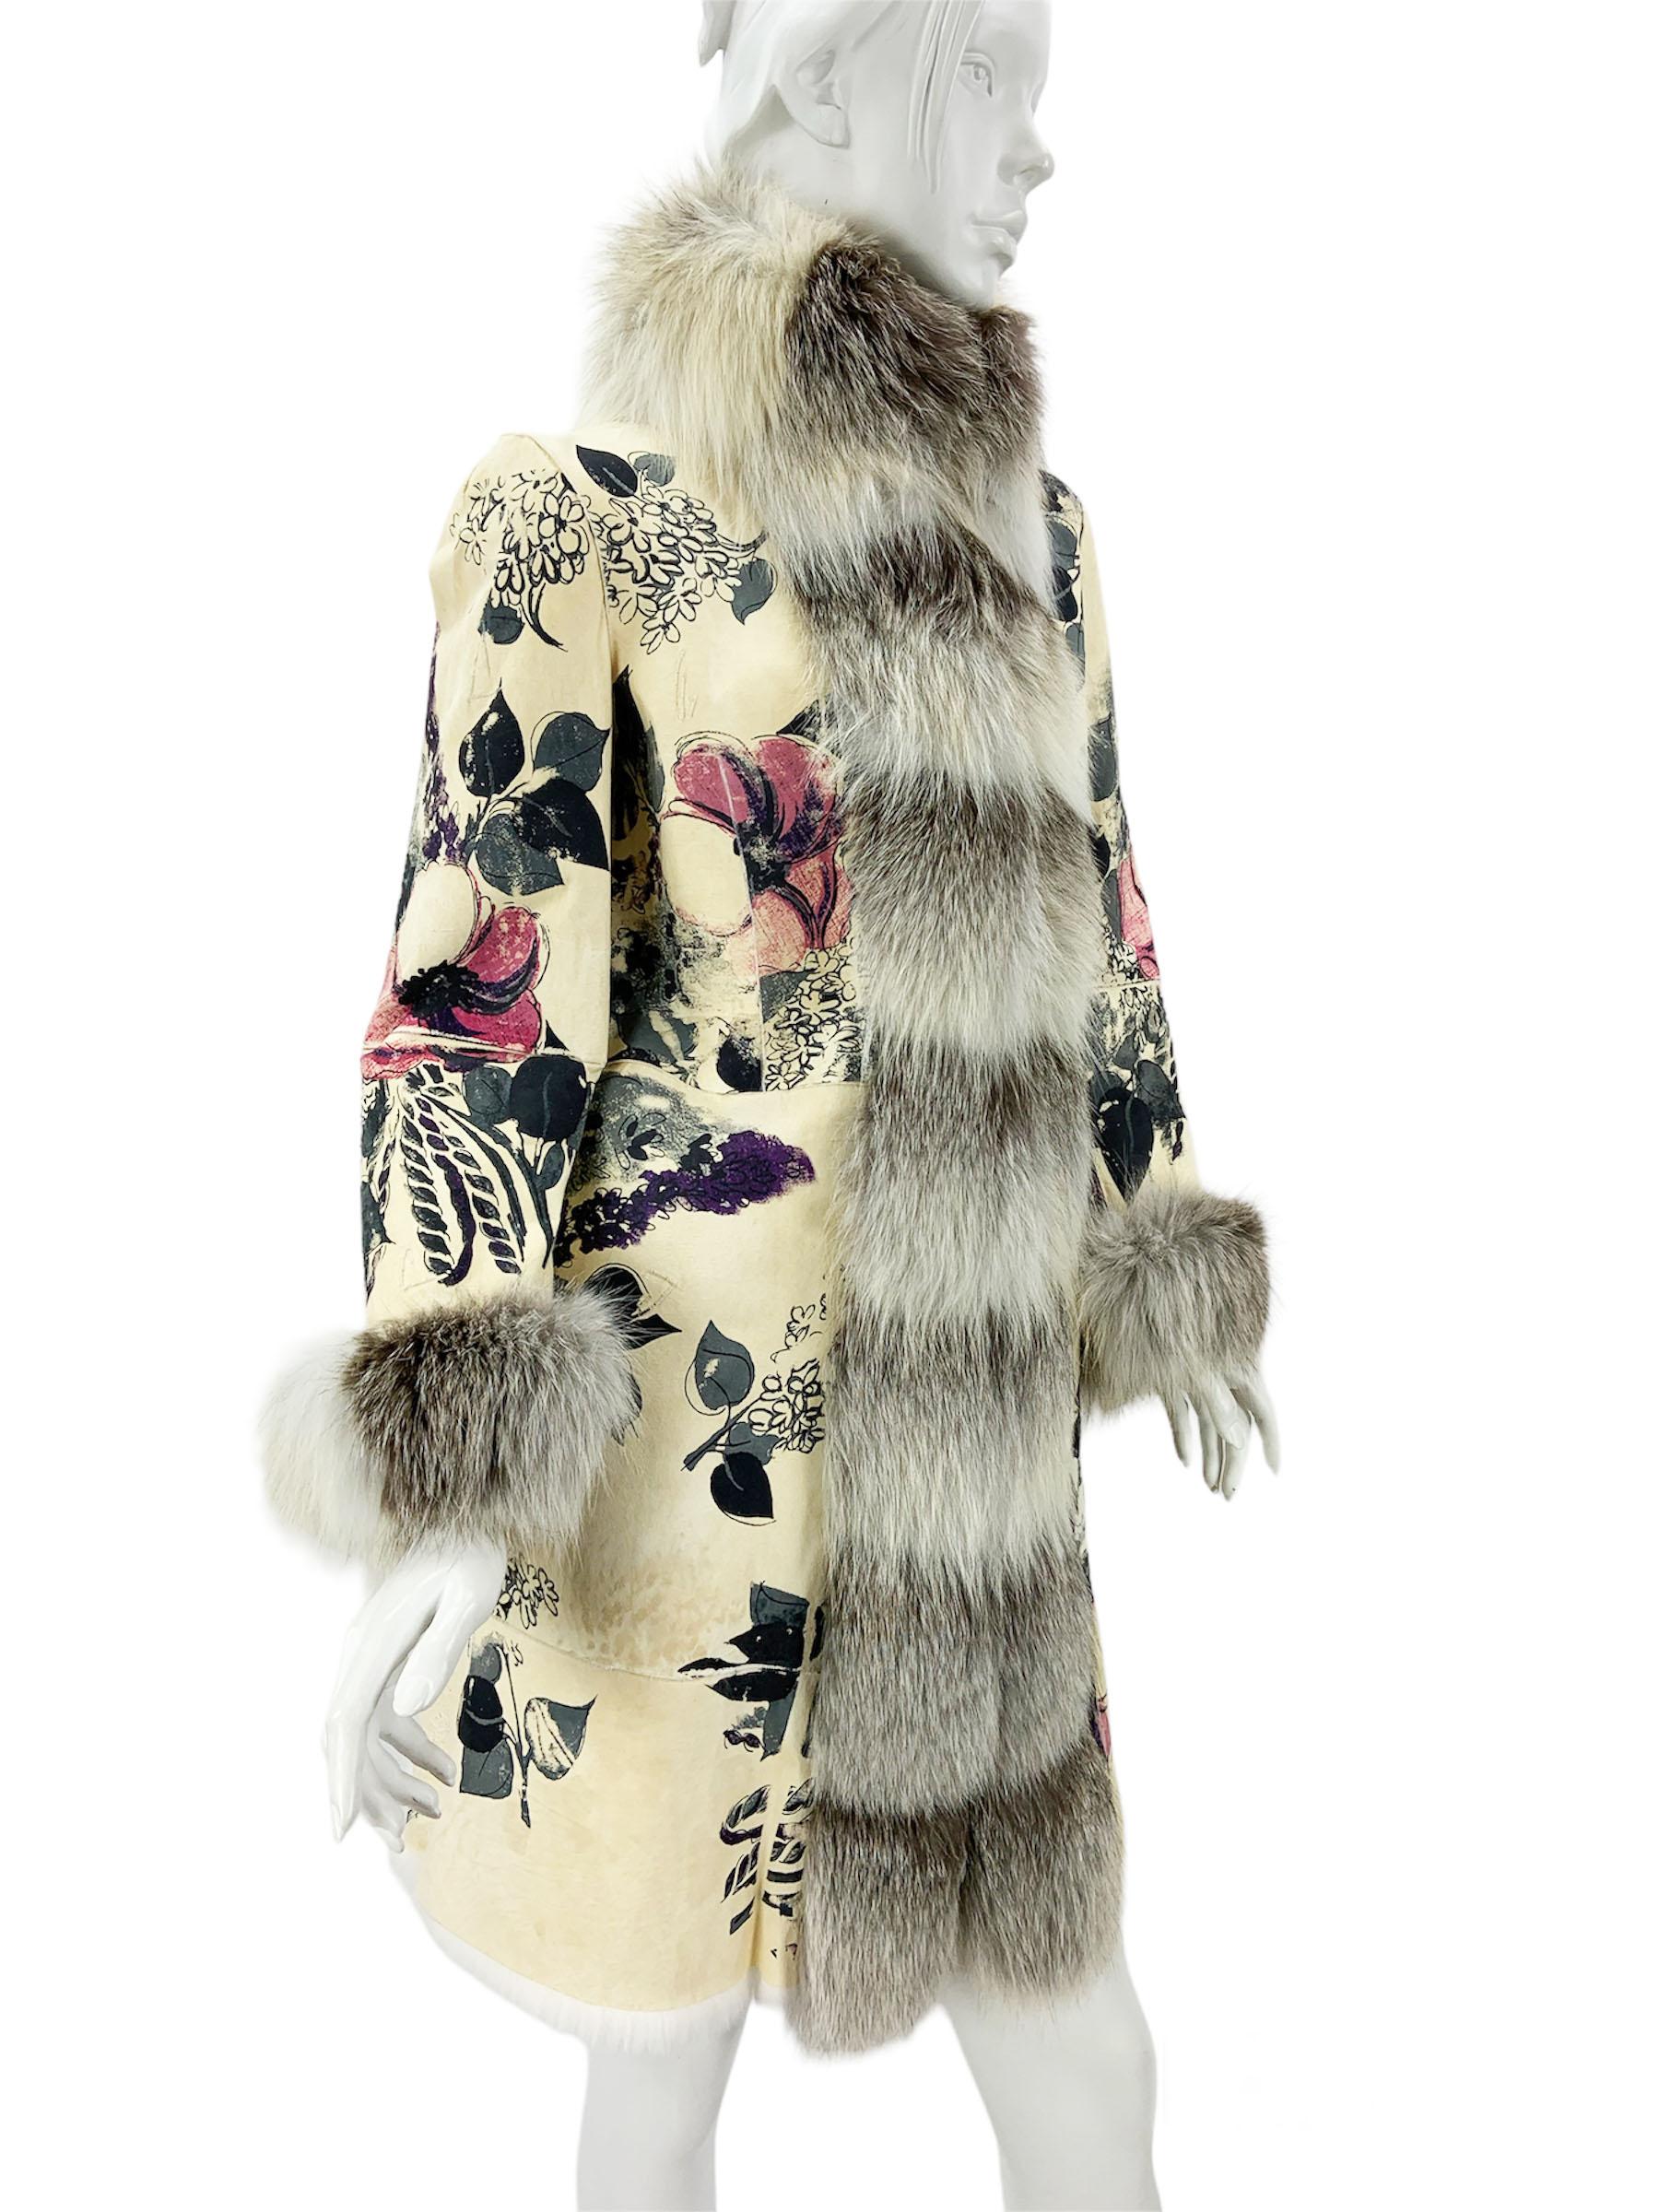 New Roberto Cavalli Shearling Fur Lined Coat
F/W 2008 Collection
Italian size 40
Beige background, Hand painted in floral design, Fox and rabbit fur.
Two side pockets, Hook and eye closure.
Measurements: Length - 36 inches, Shoulders - 17